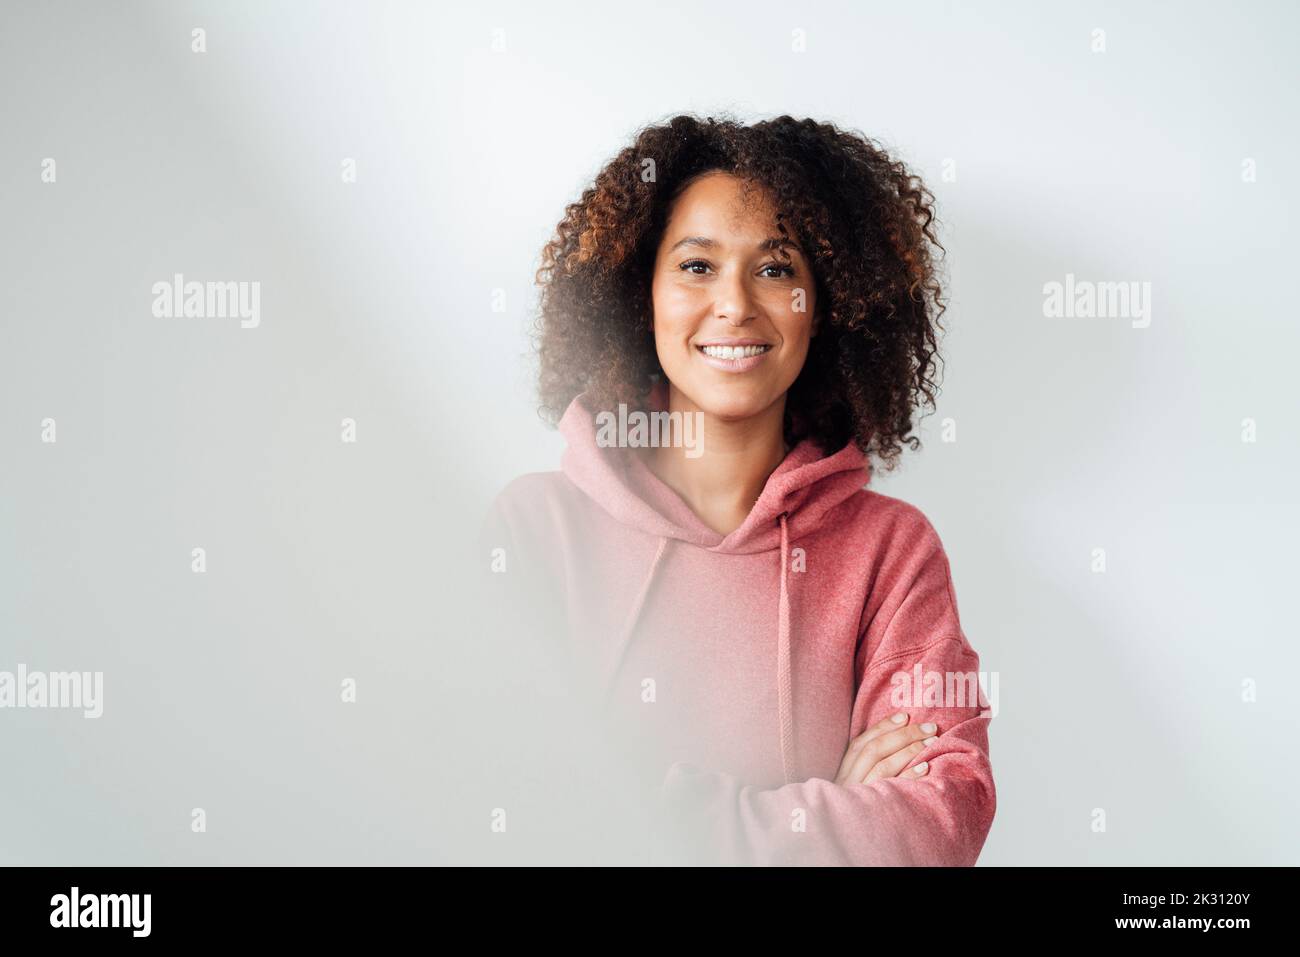 Smiling mature woman in front of white wall Stock Photo